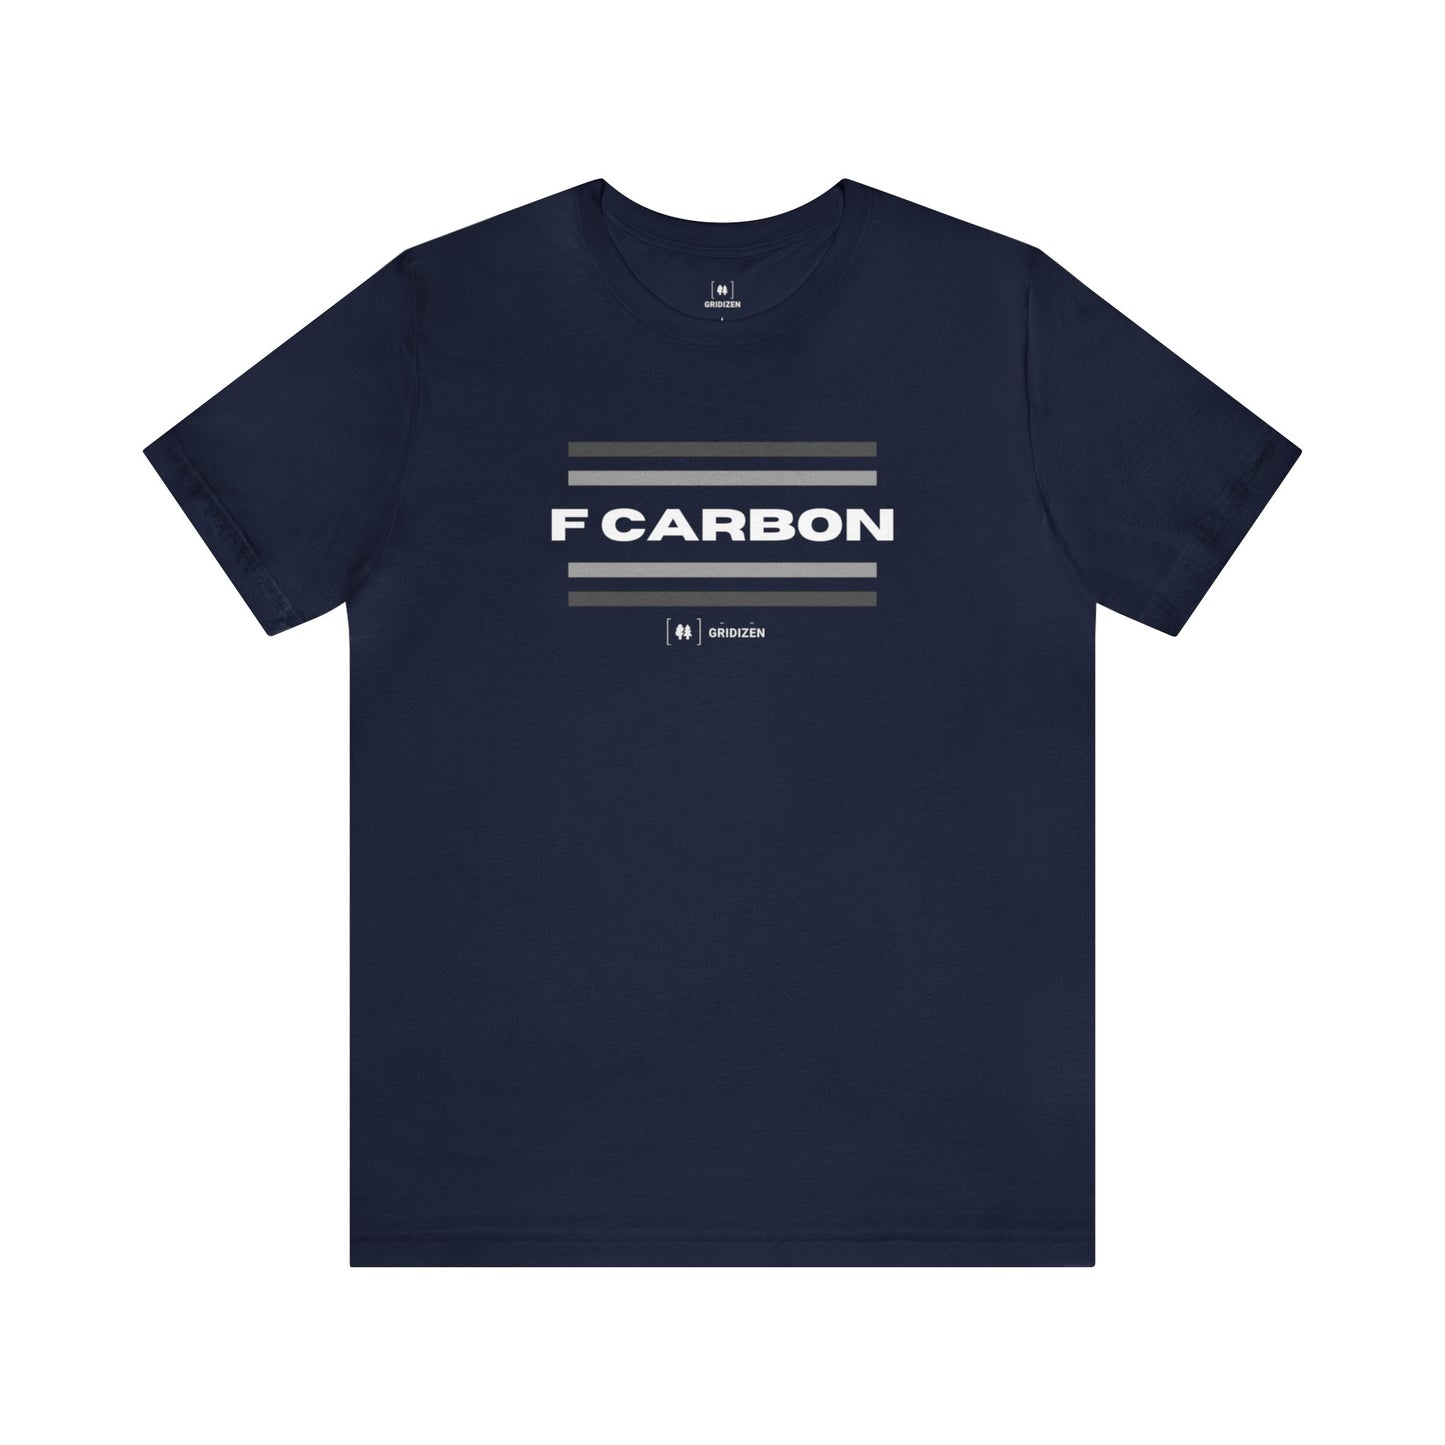 F Carbon, Seriously